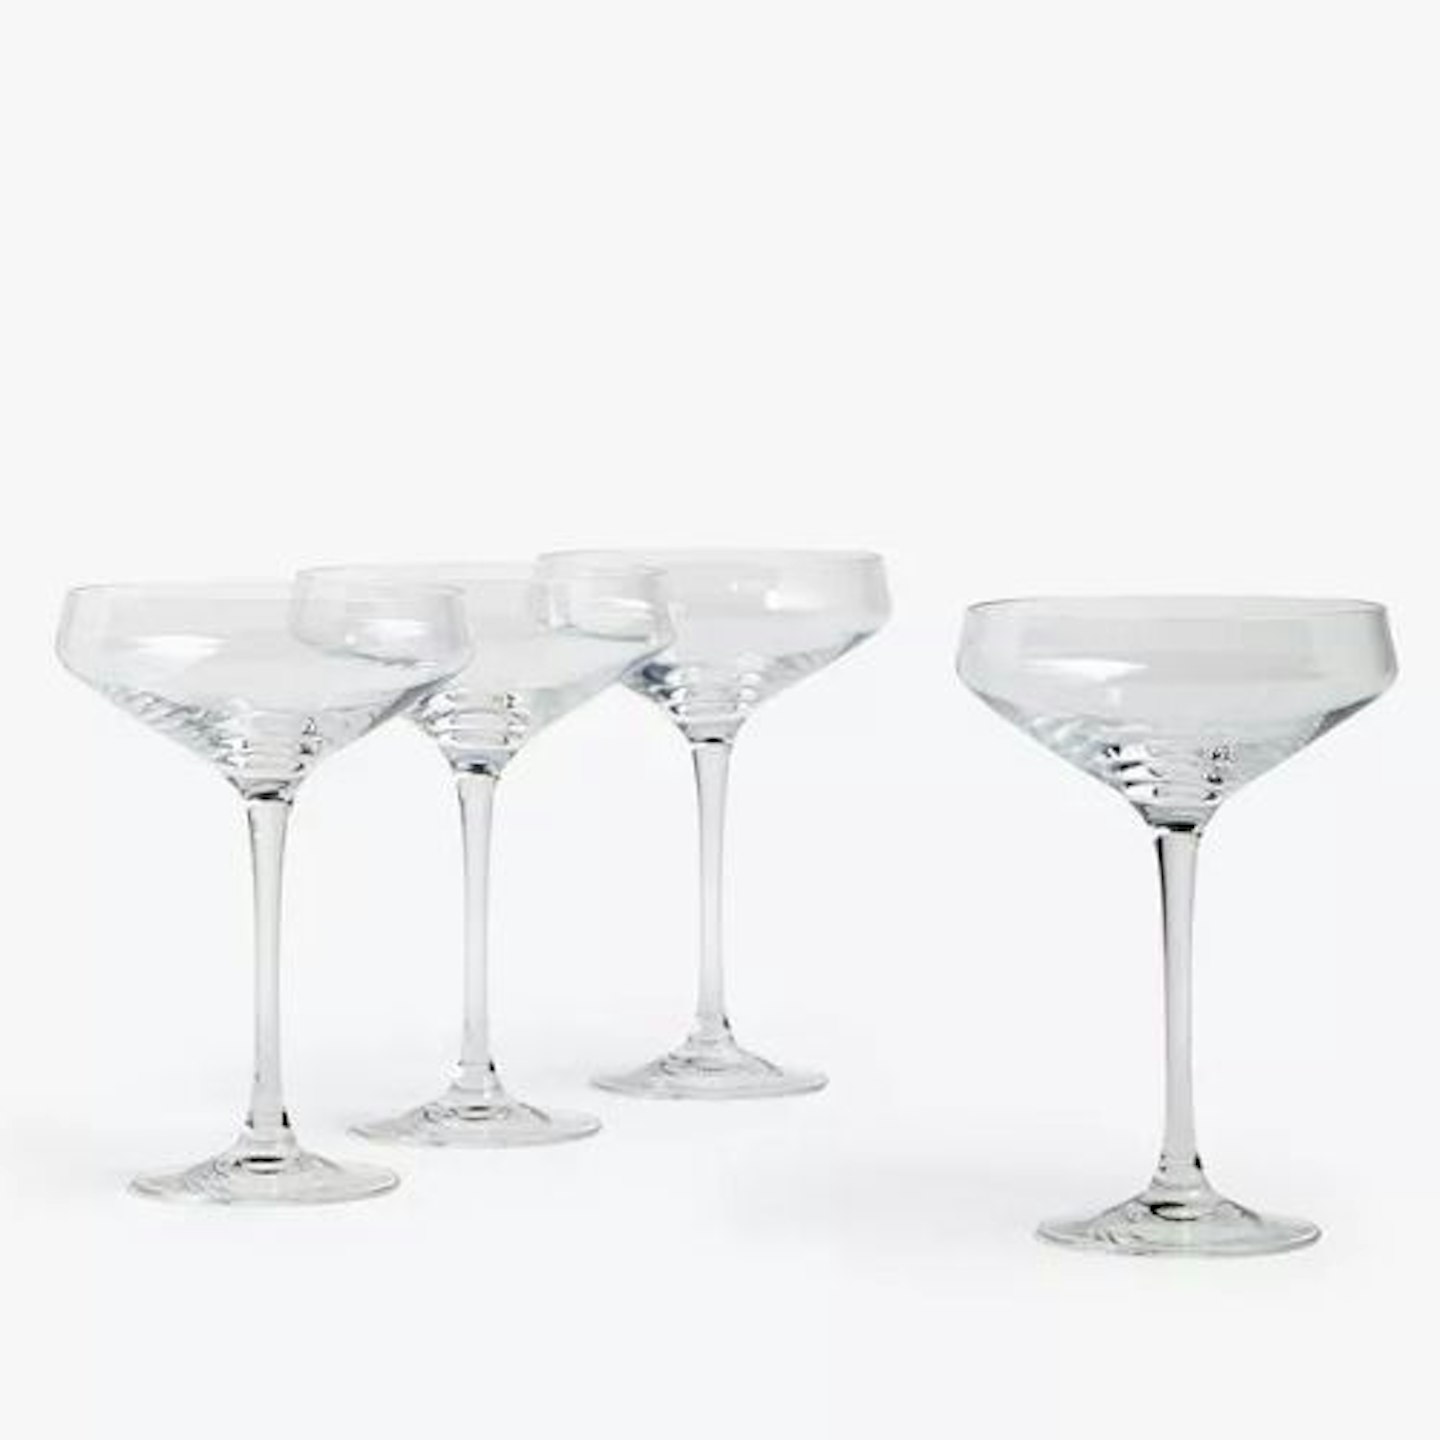 ANYDAY John Lewis & Partners Drink Cocktail Coupe Glasses